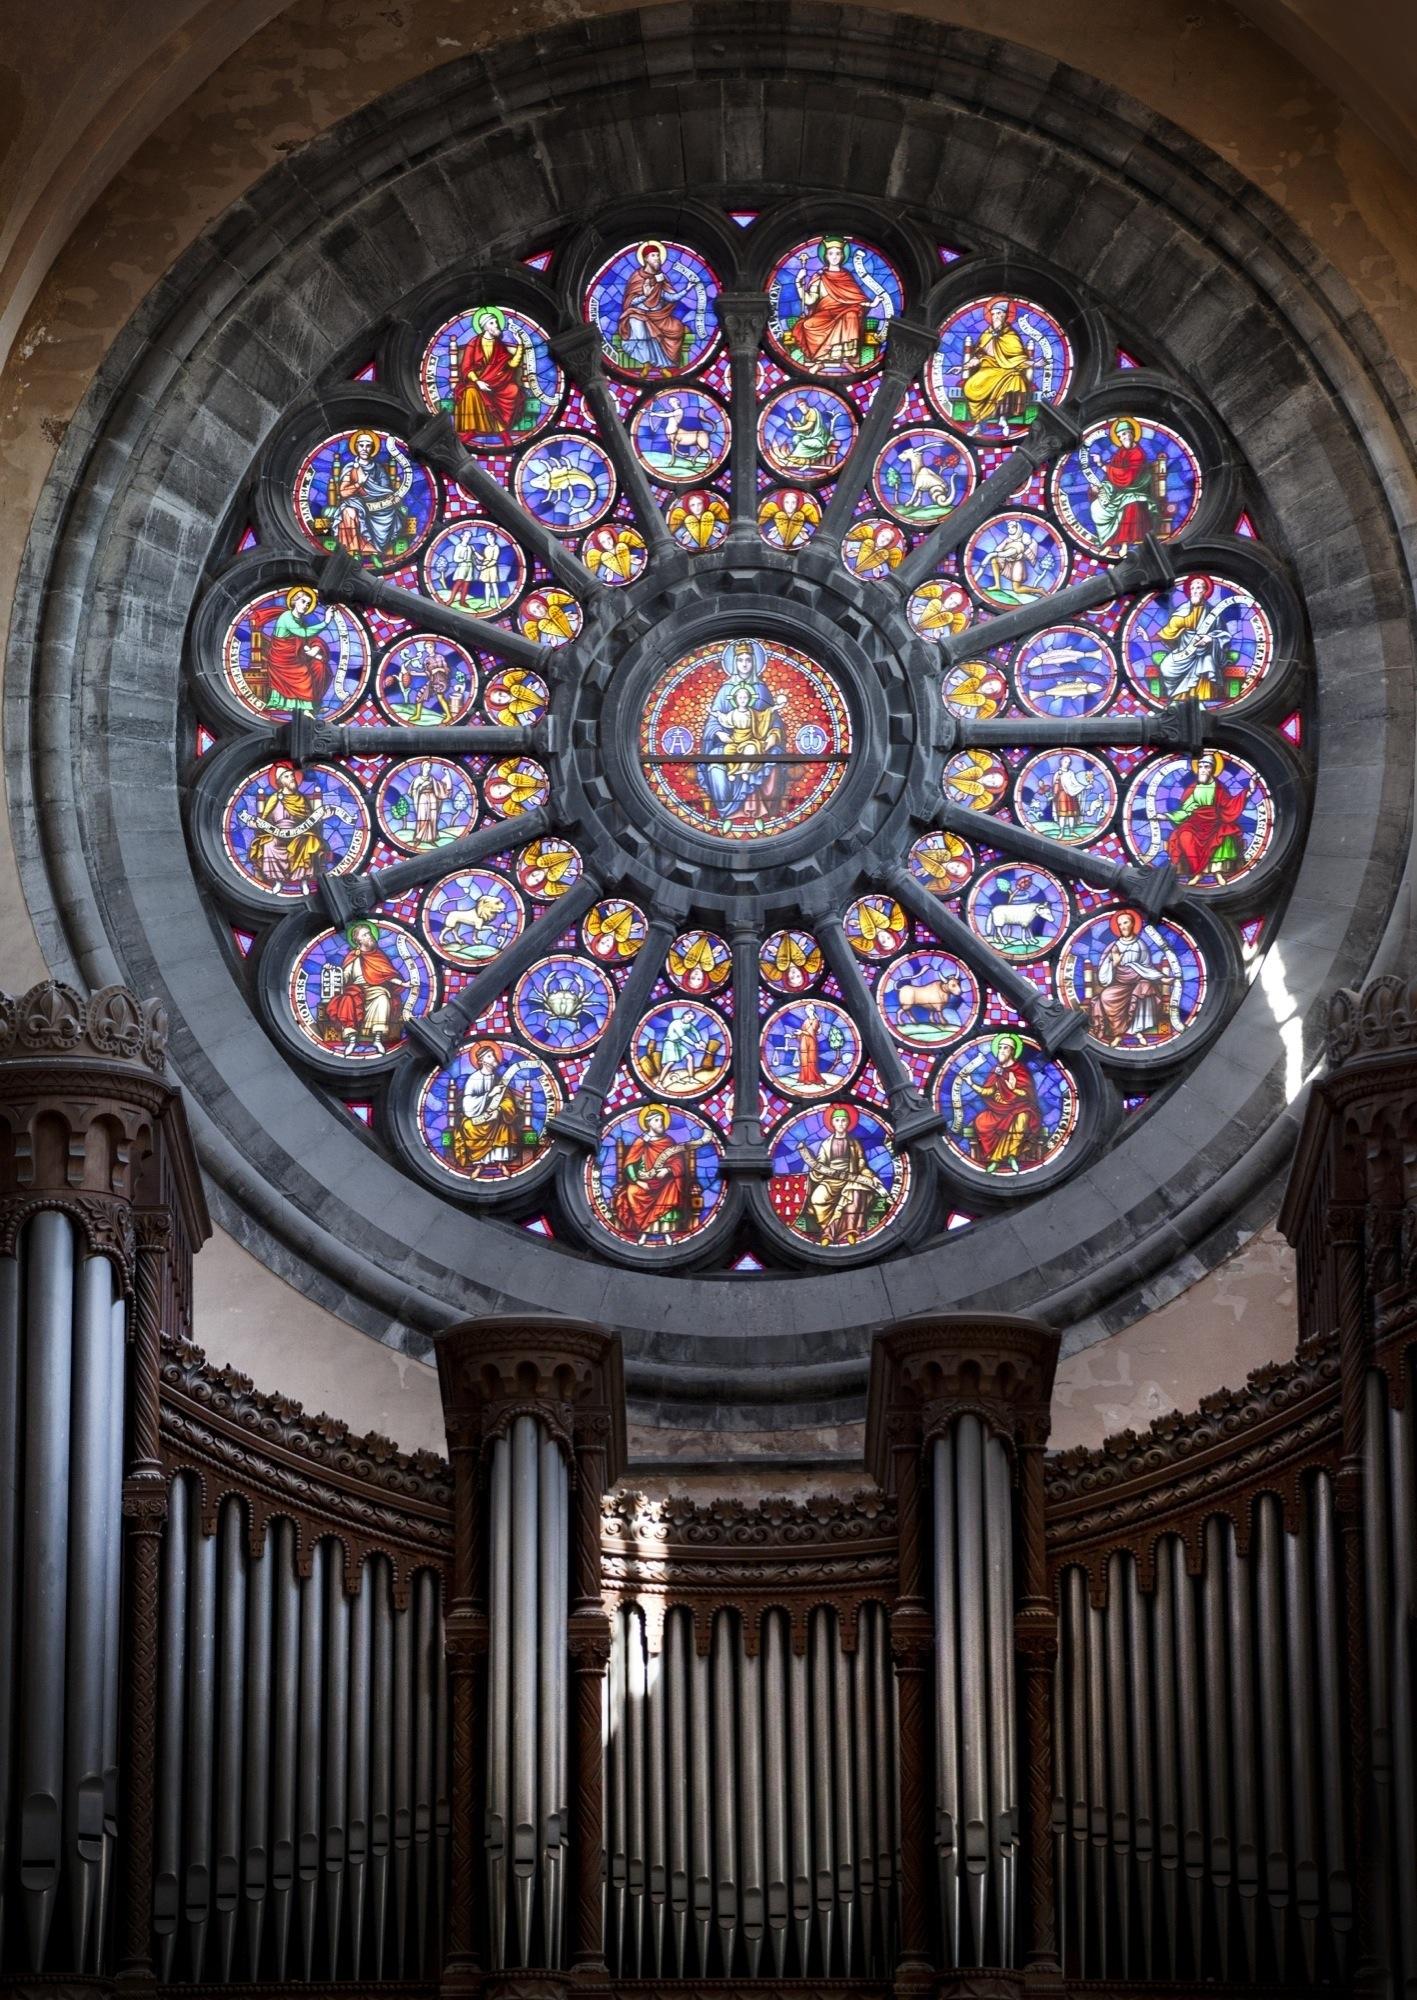 Located in the Romanesque nave, the impressive seven metre diameter rose window overlooks the large pipe organ. – © Wapict / Visitwapi